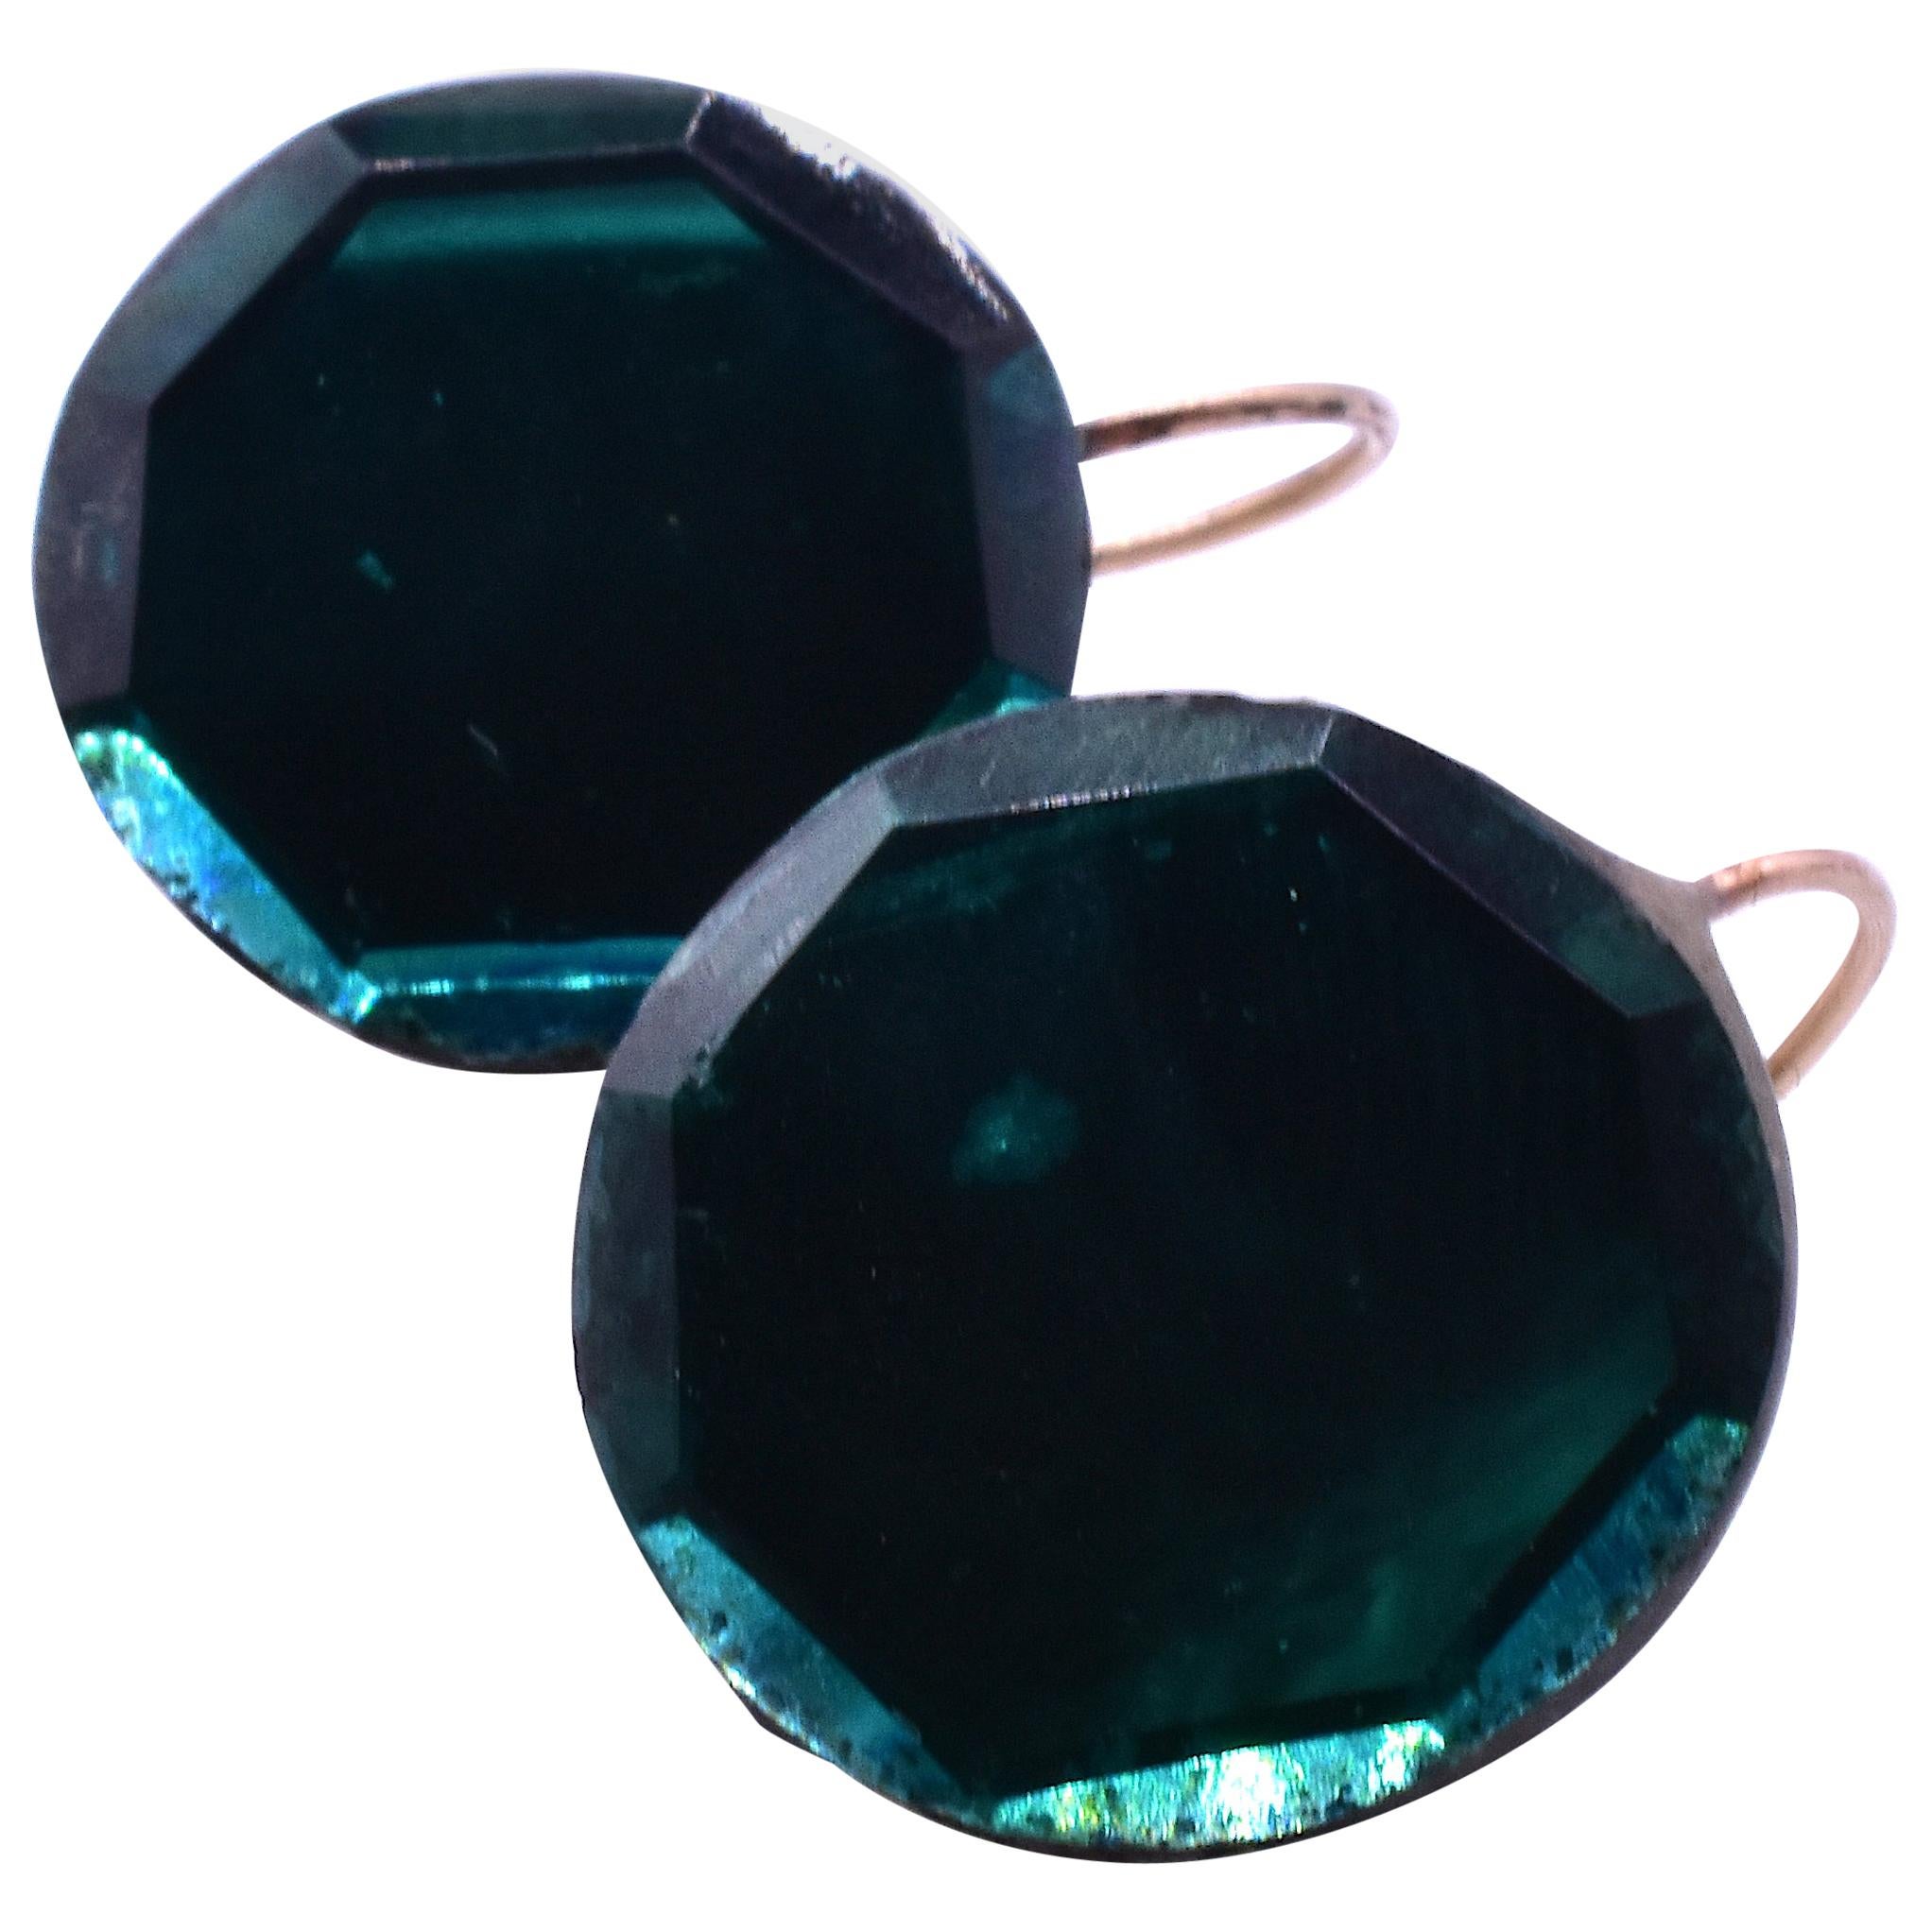 Teal Round Vauxhall Glass Earrings with Gold Shepherds Hook Ear Wires circa 1860 For Sale